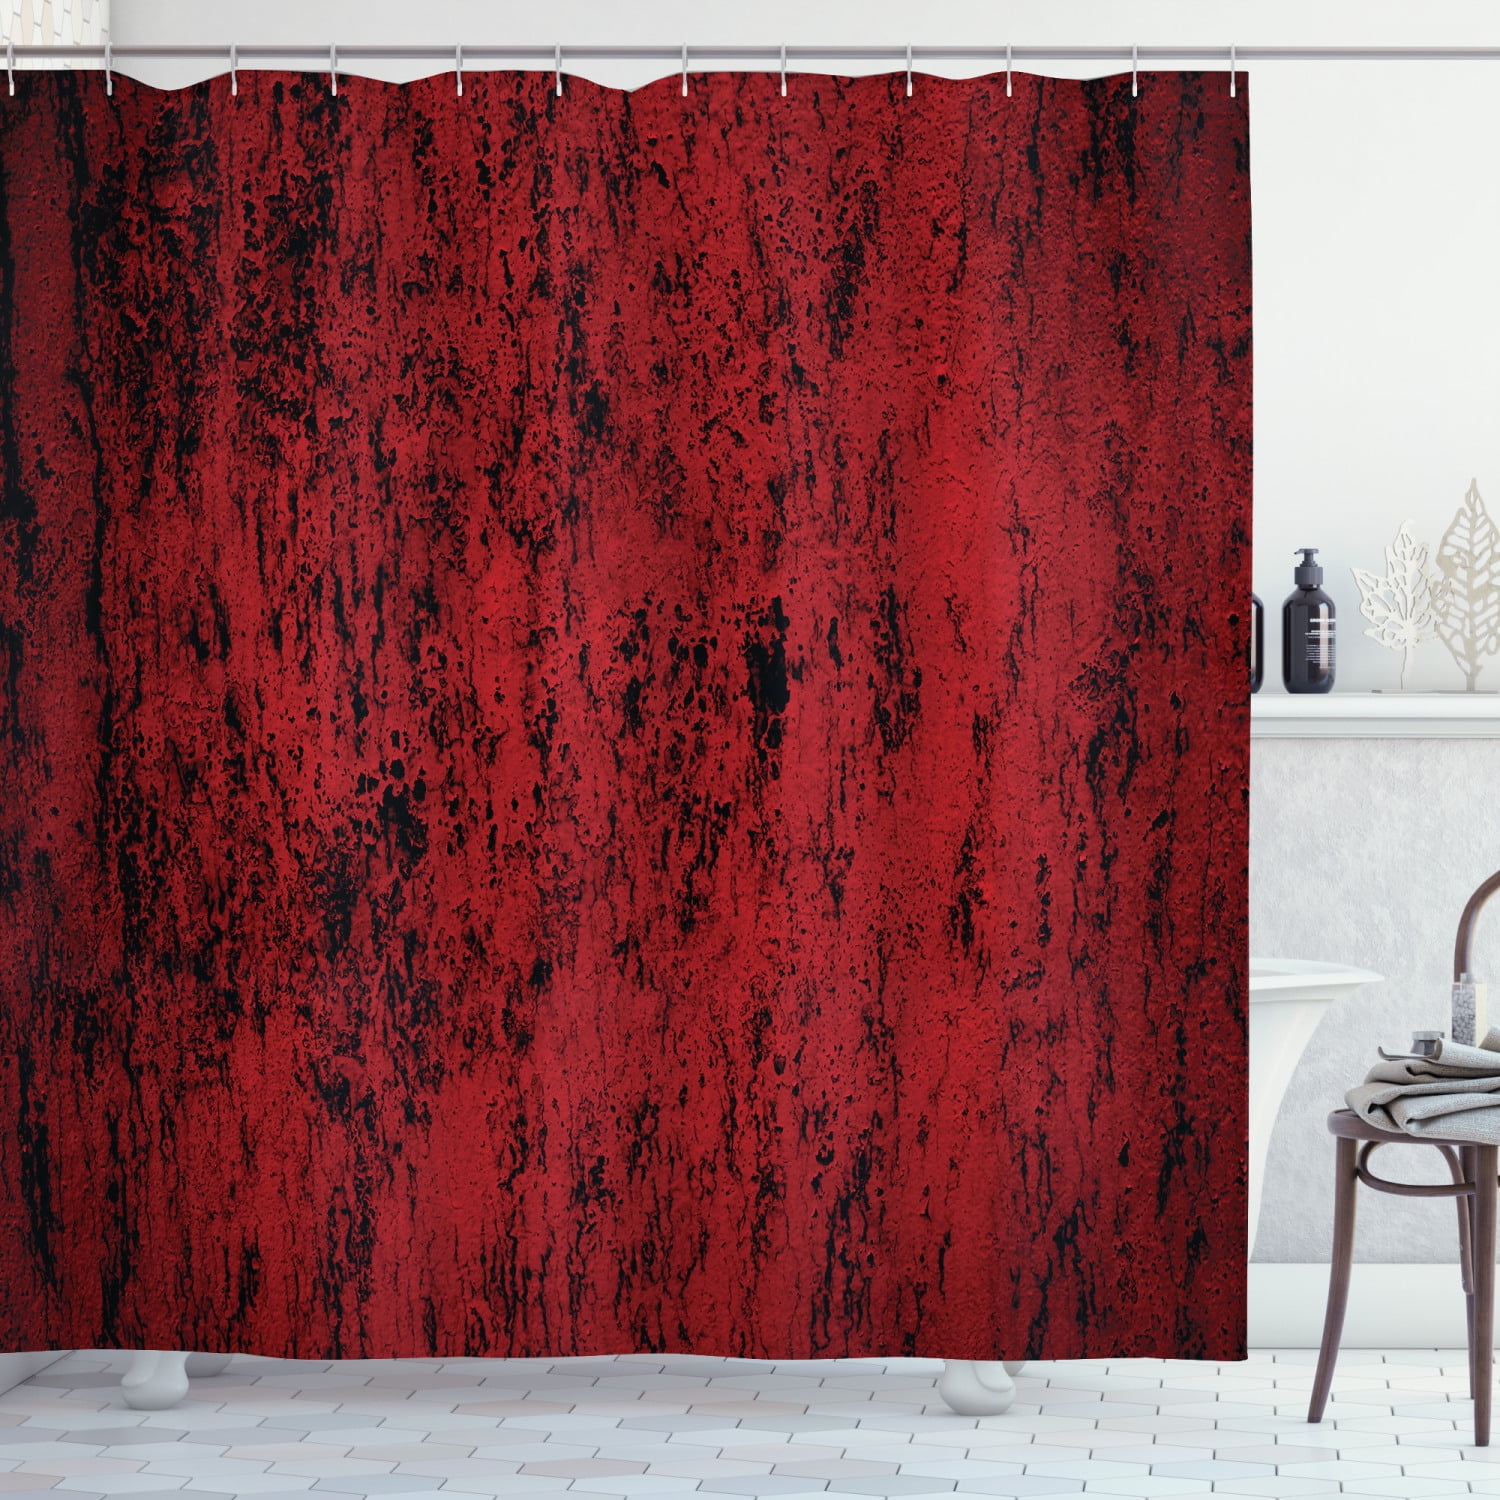 Old Rustic Shabby Red Door Bathroom Shower Curtain Fabric w/12 Hooks 71*71inches 